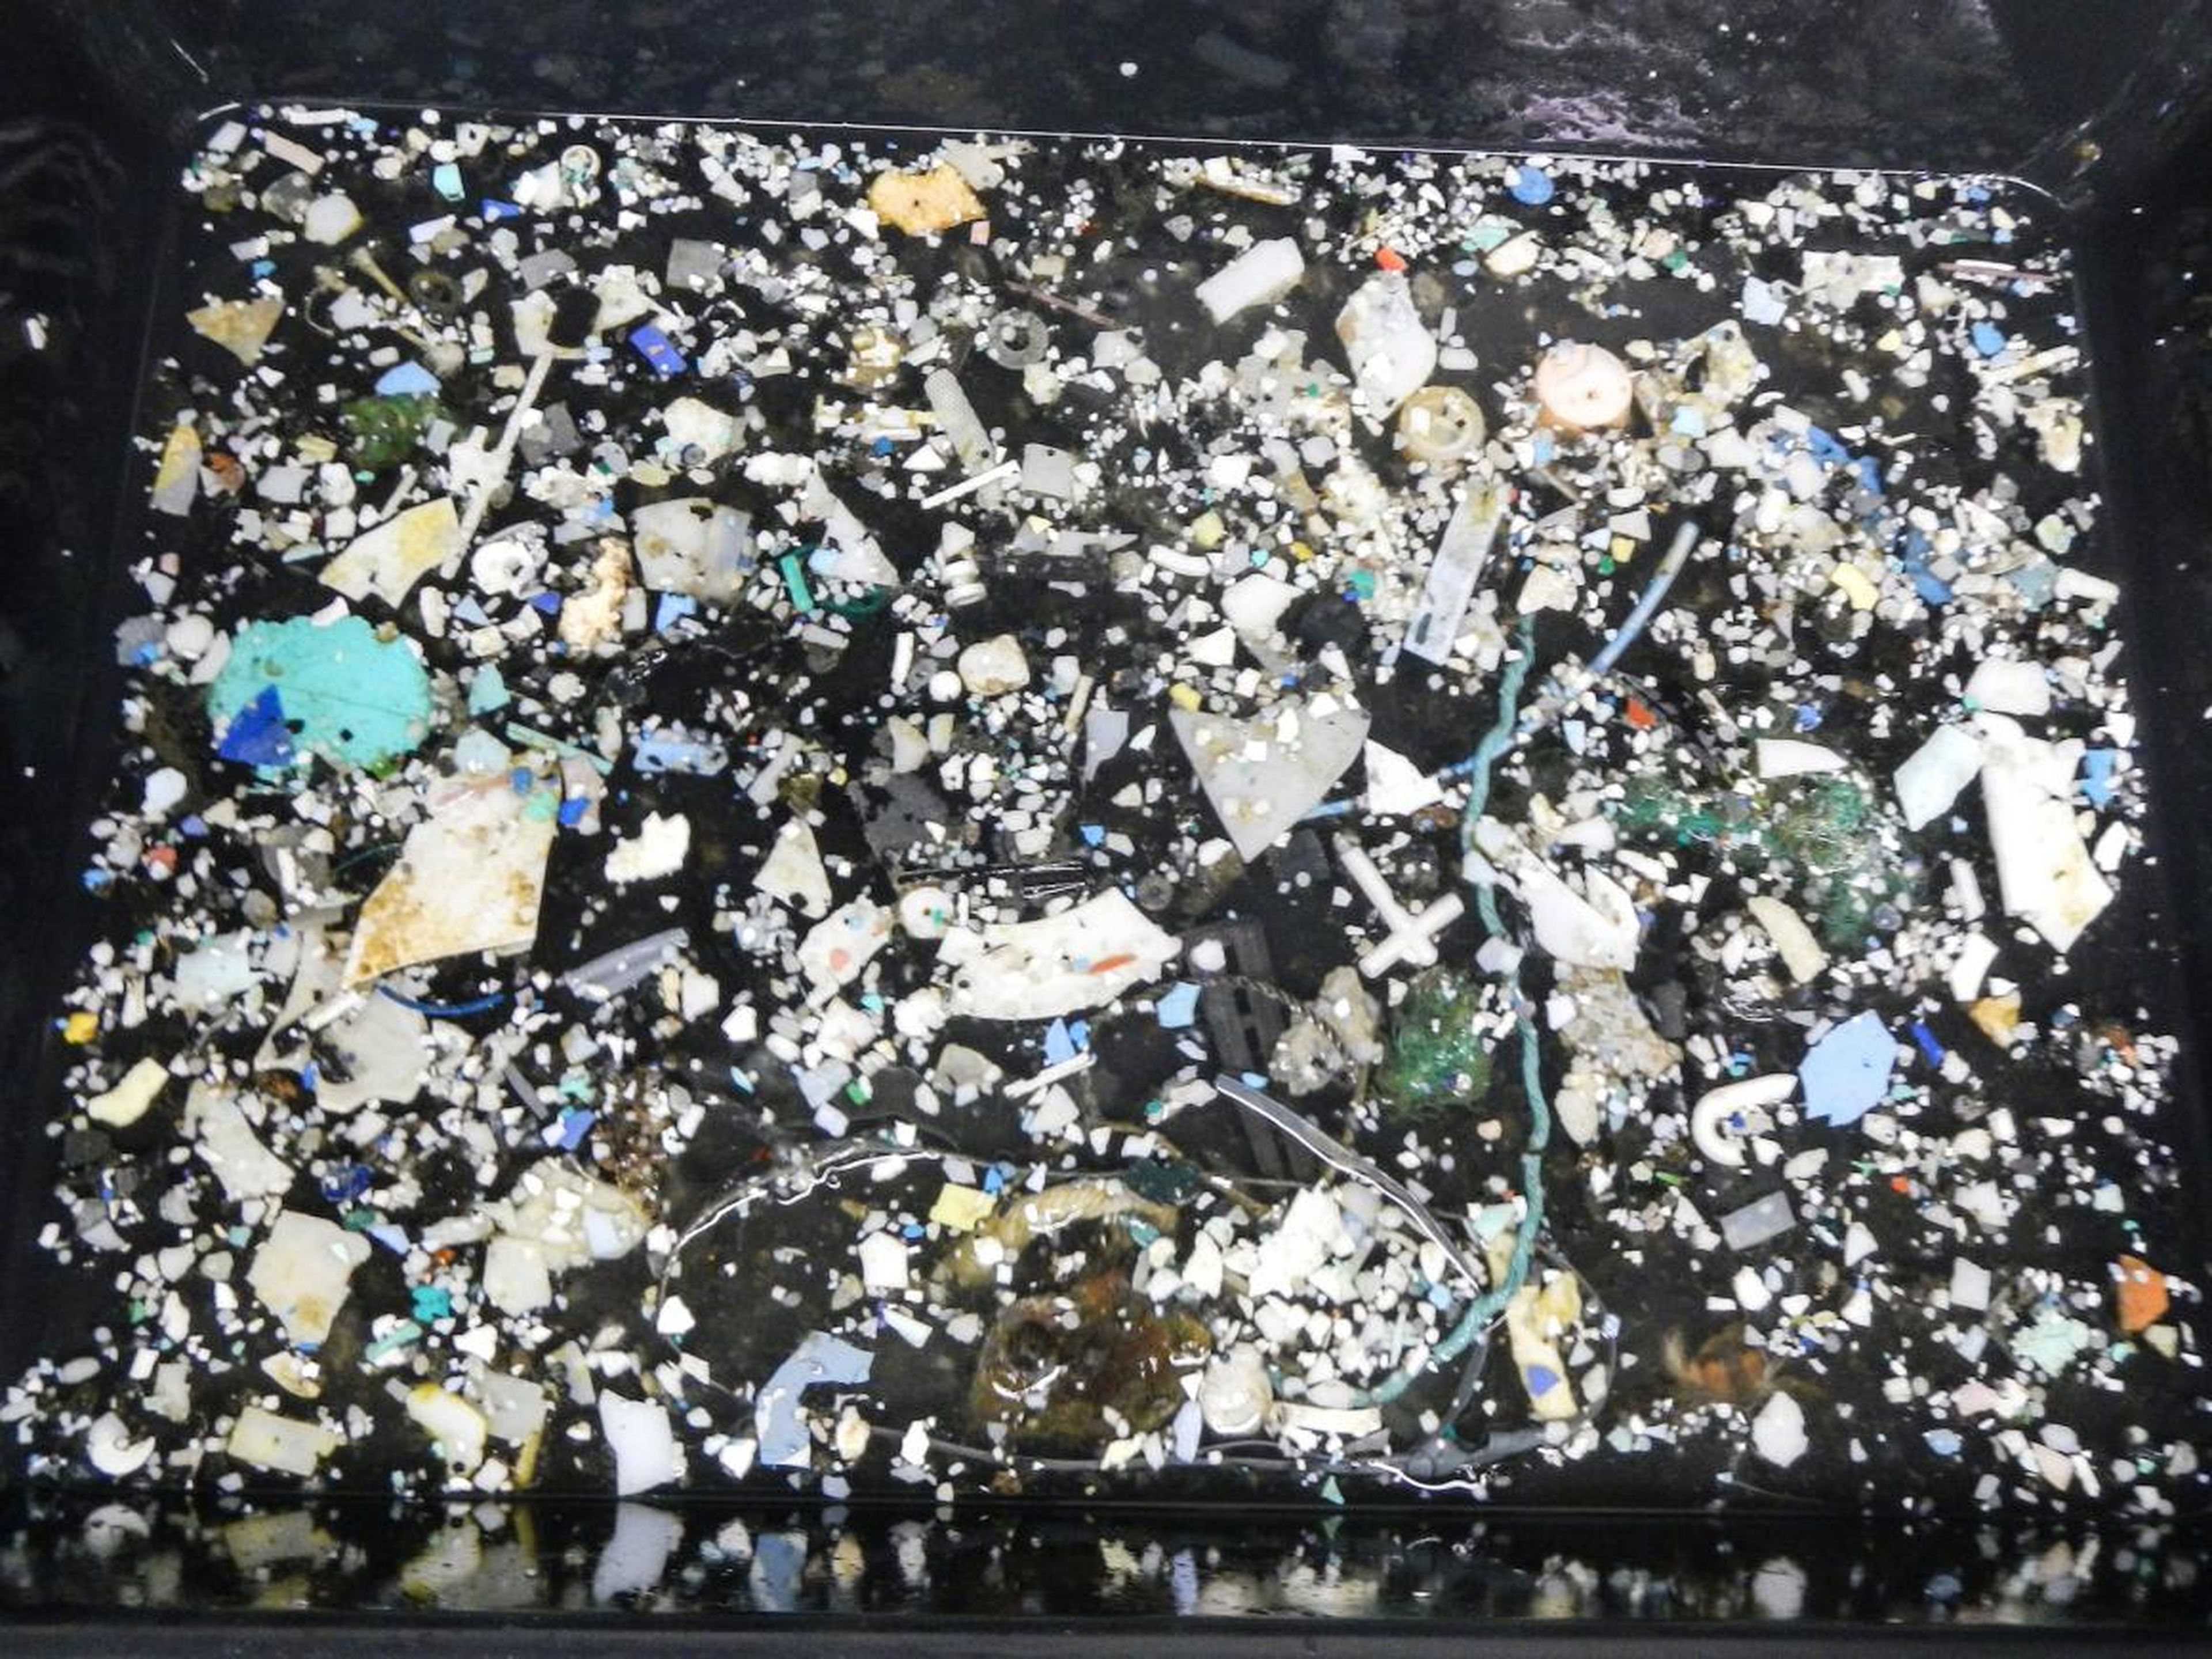 Some of the plastic the Ocean Cleanup team found while surveying the Great Pacific Garbage Patch.